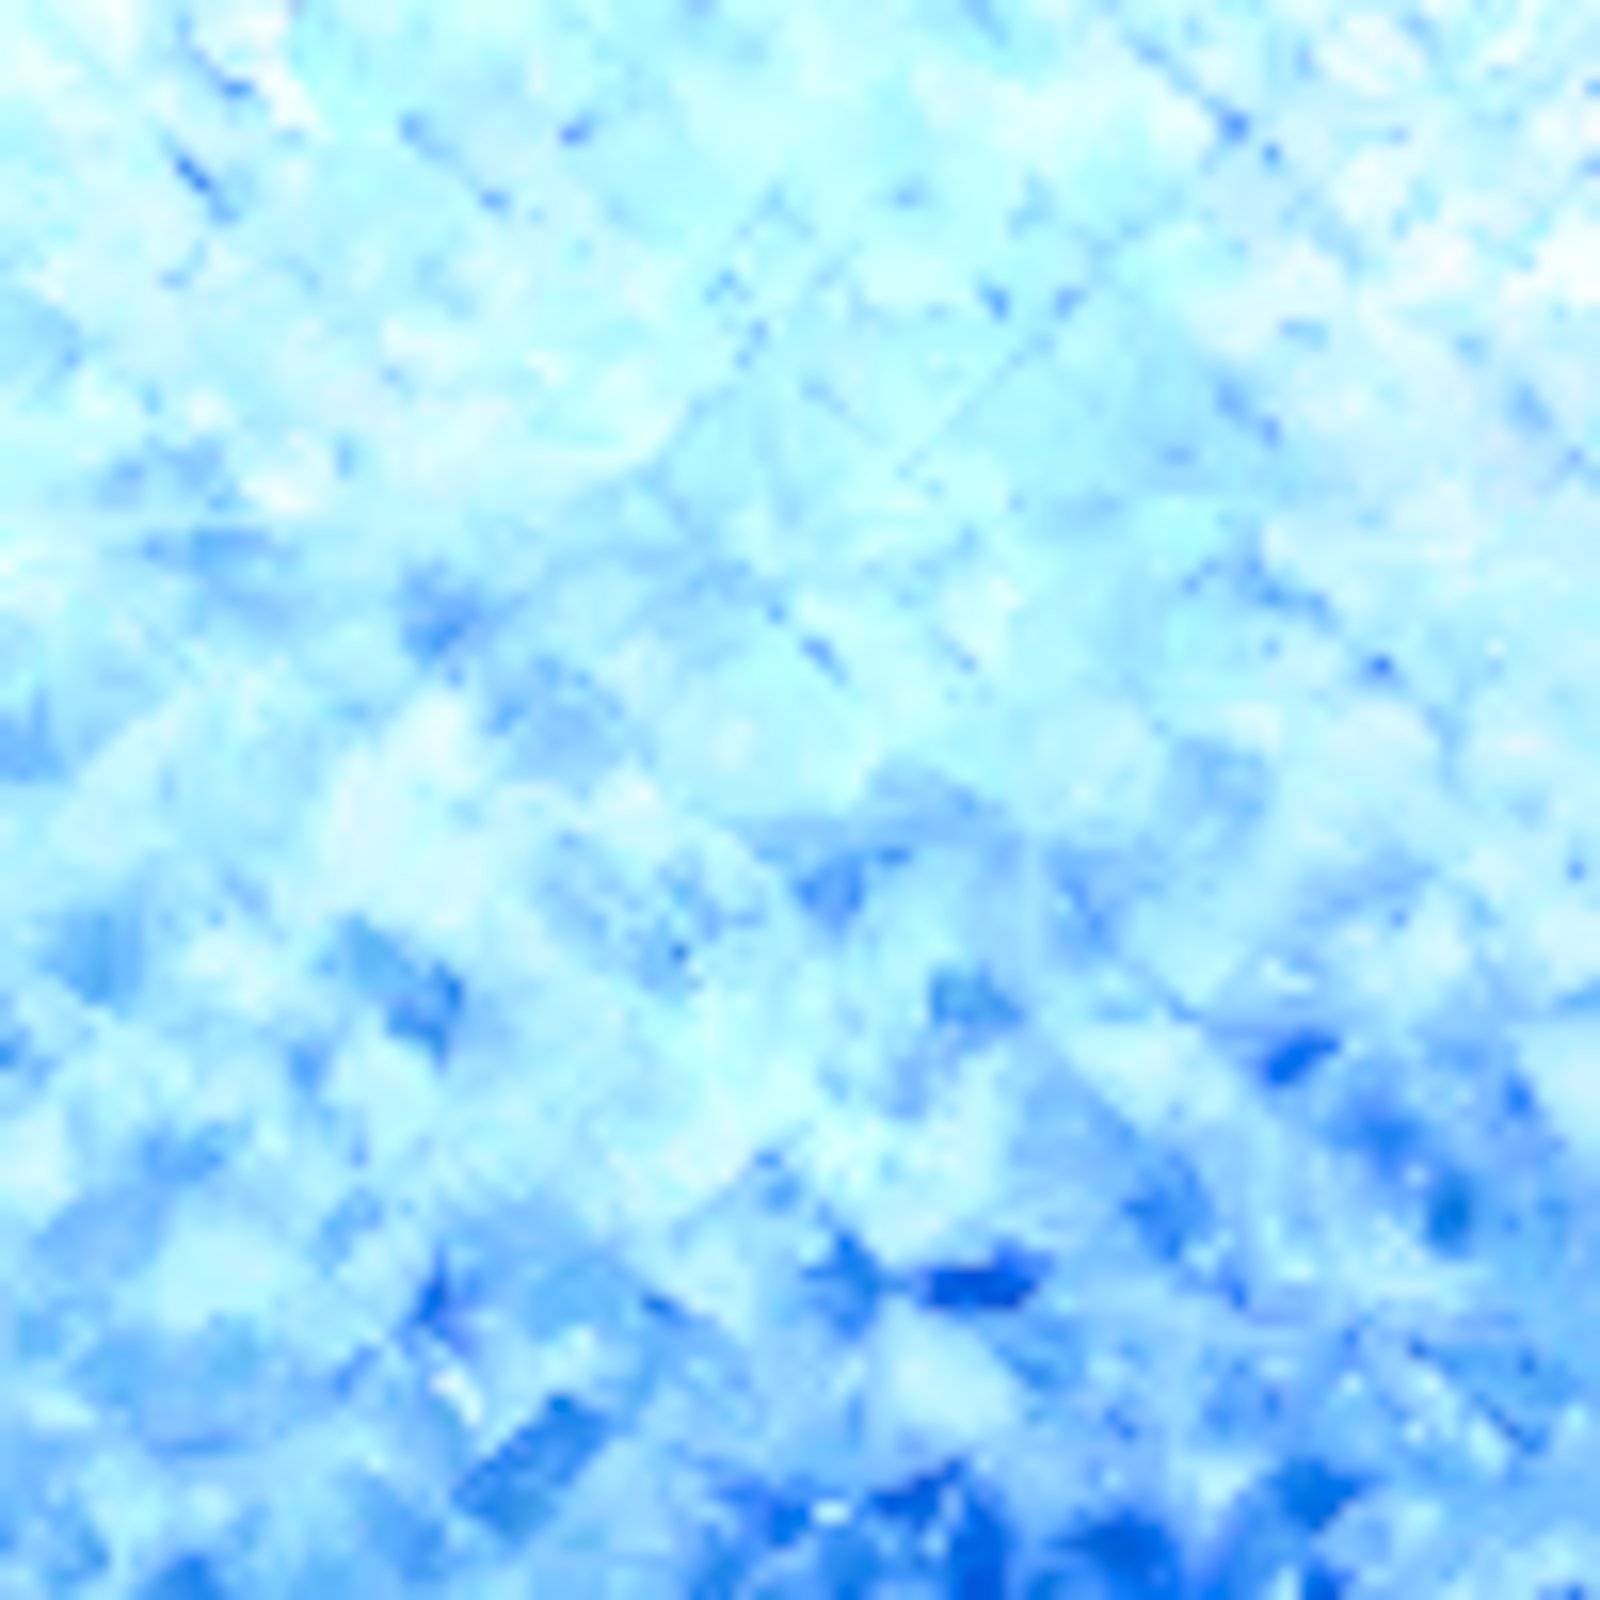 Glow blue mosaic background. EPS 8 vector file included